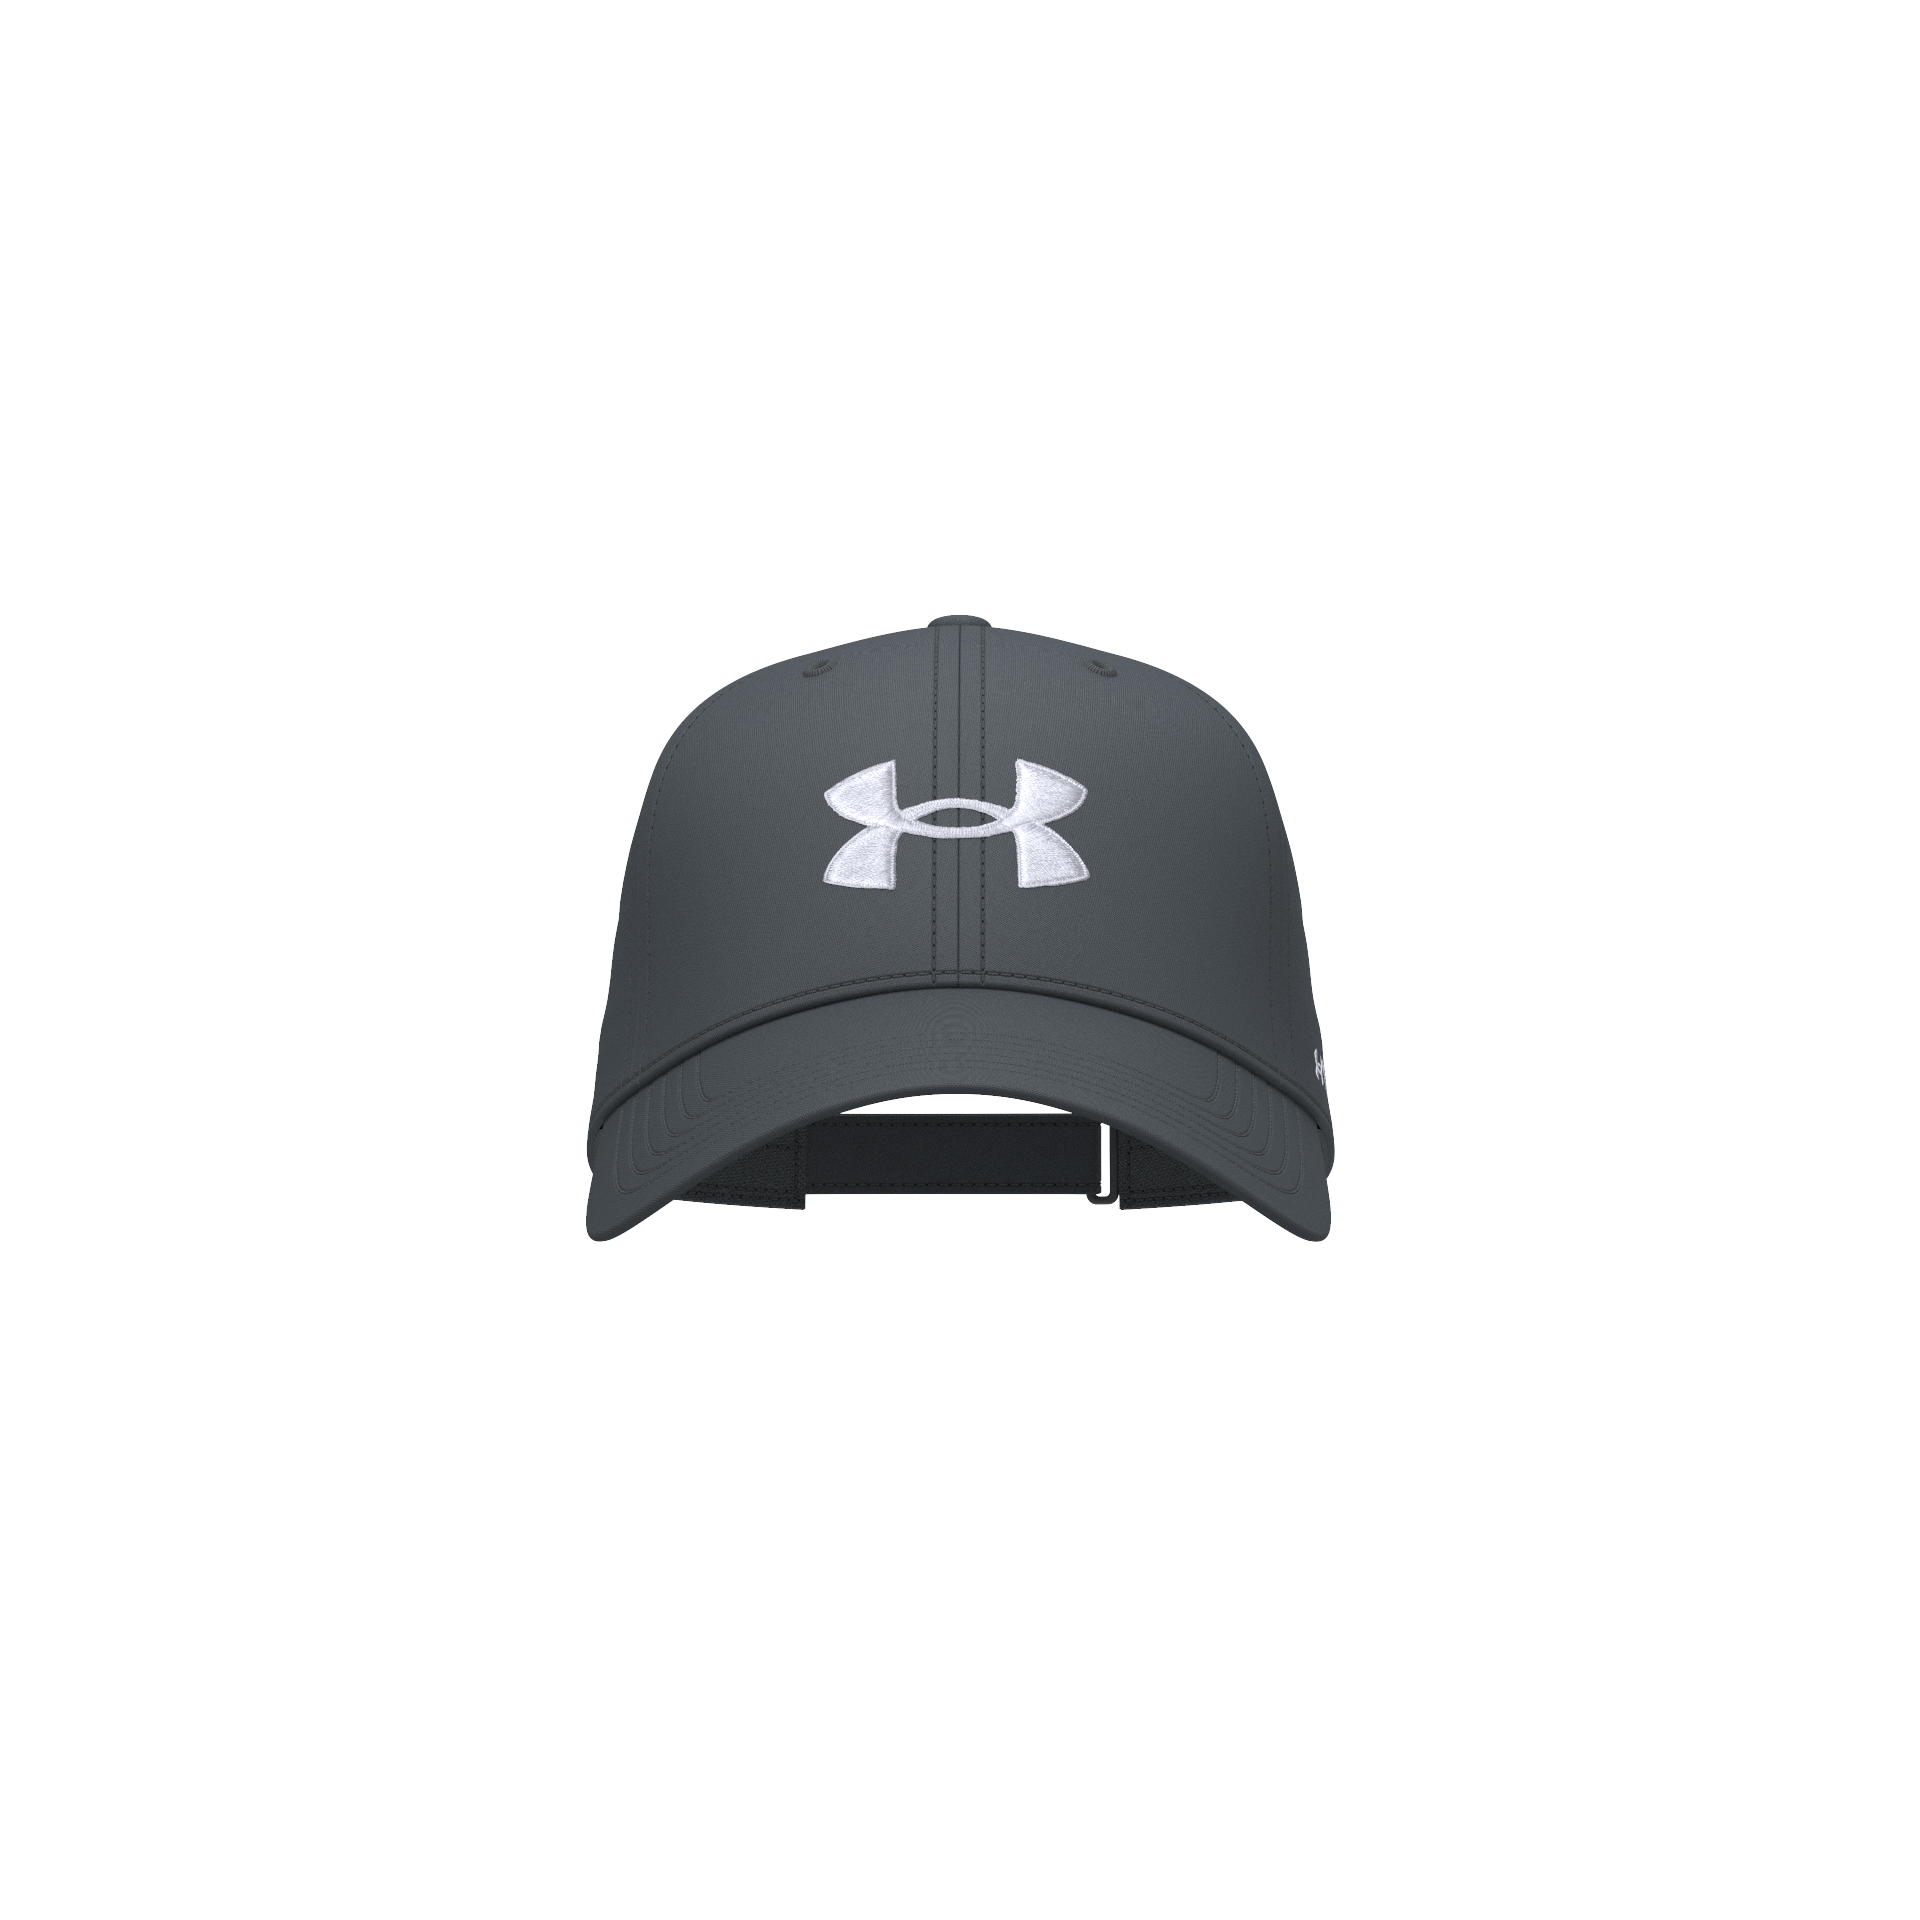 Under Armour Golf96 Hat Pitch Gray/White